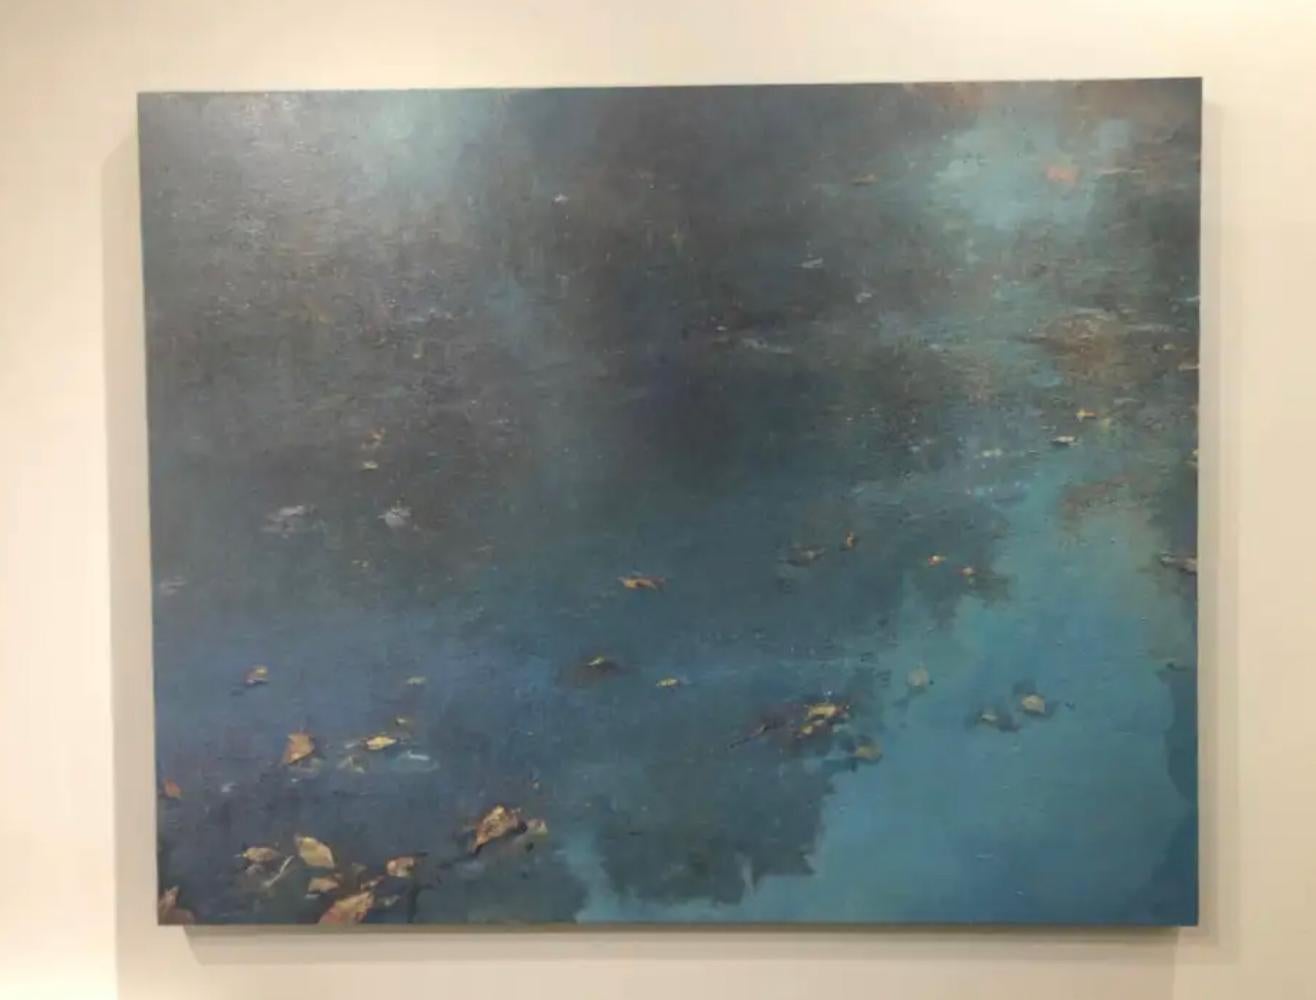 Elegant abstract scene featuring floating leaves on water painted in beautiful blues with touches of gold. Gail Chase Bien paints thinly layered oil on linen over extended periods (months to even years) to complete a single work of art. Taking cues